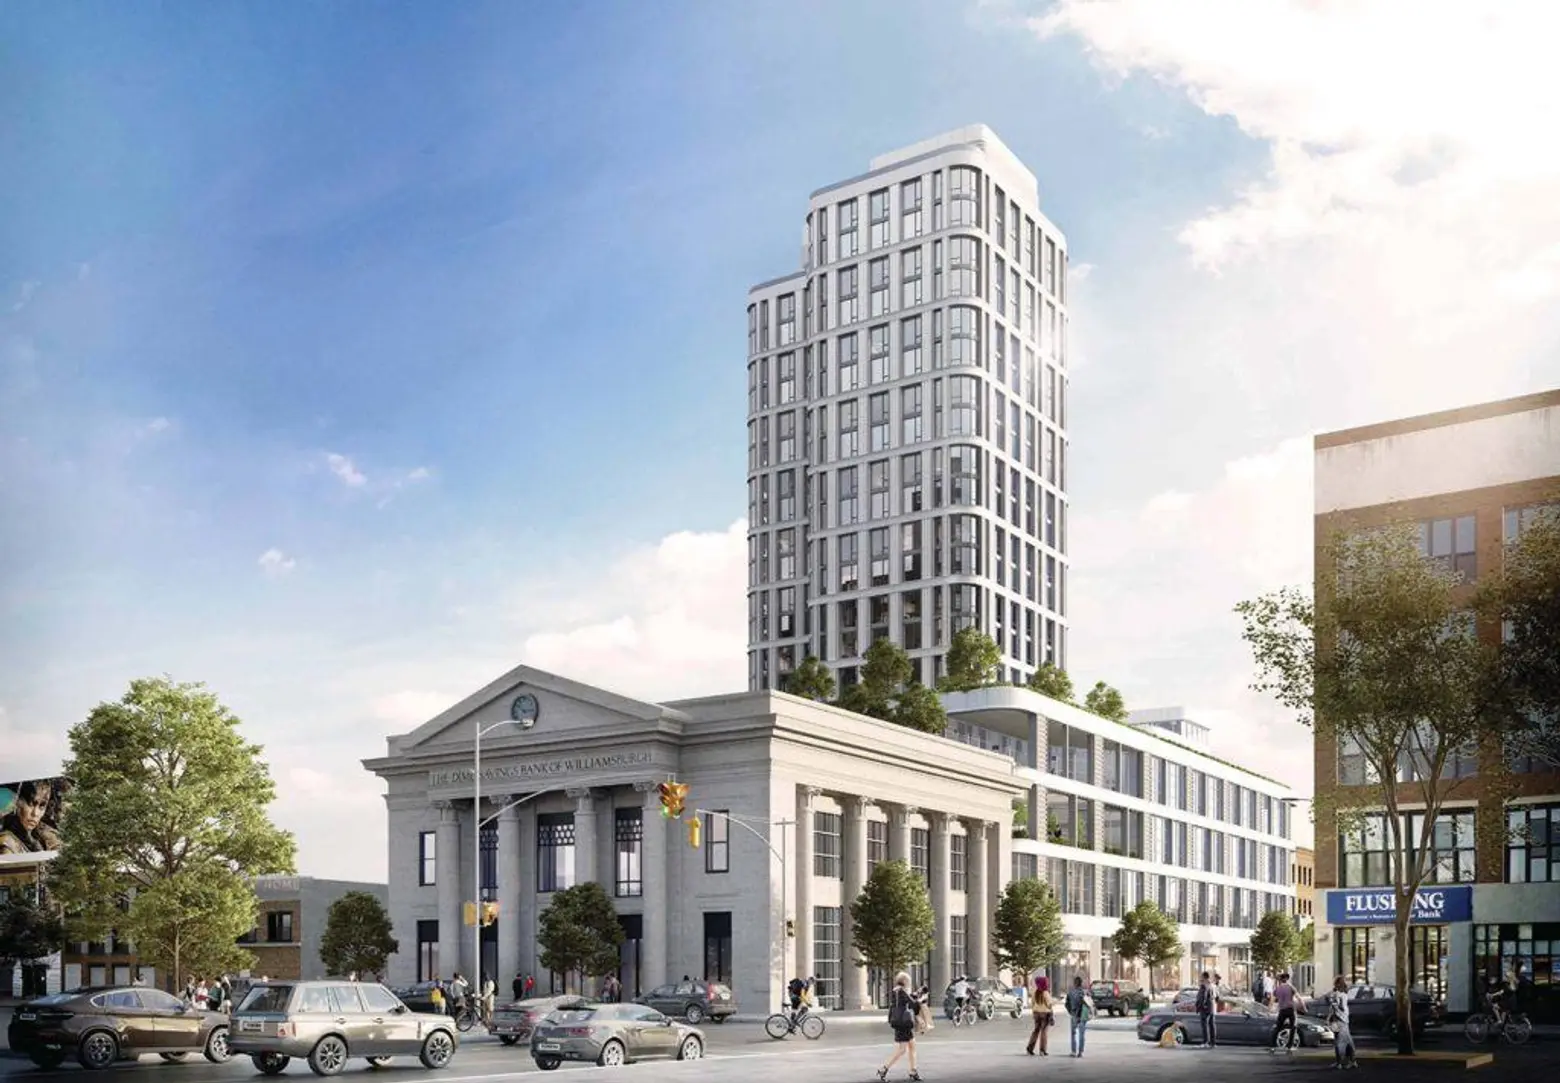 REVEALED: 23-story tower at South Williamsburg’s Dime Savings Bank site